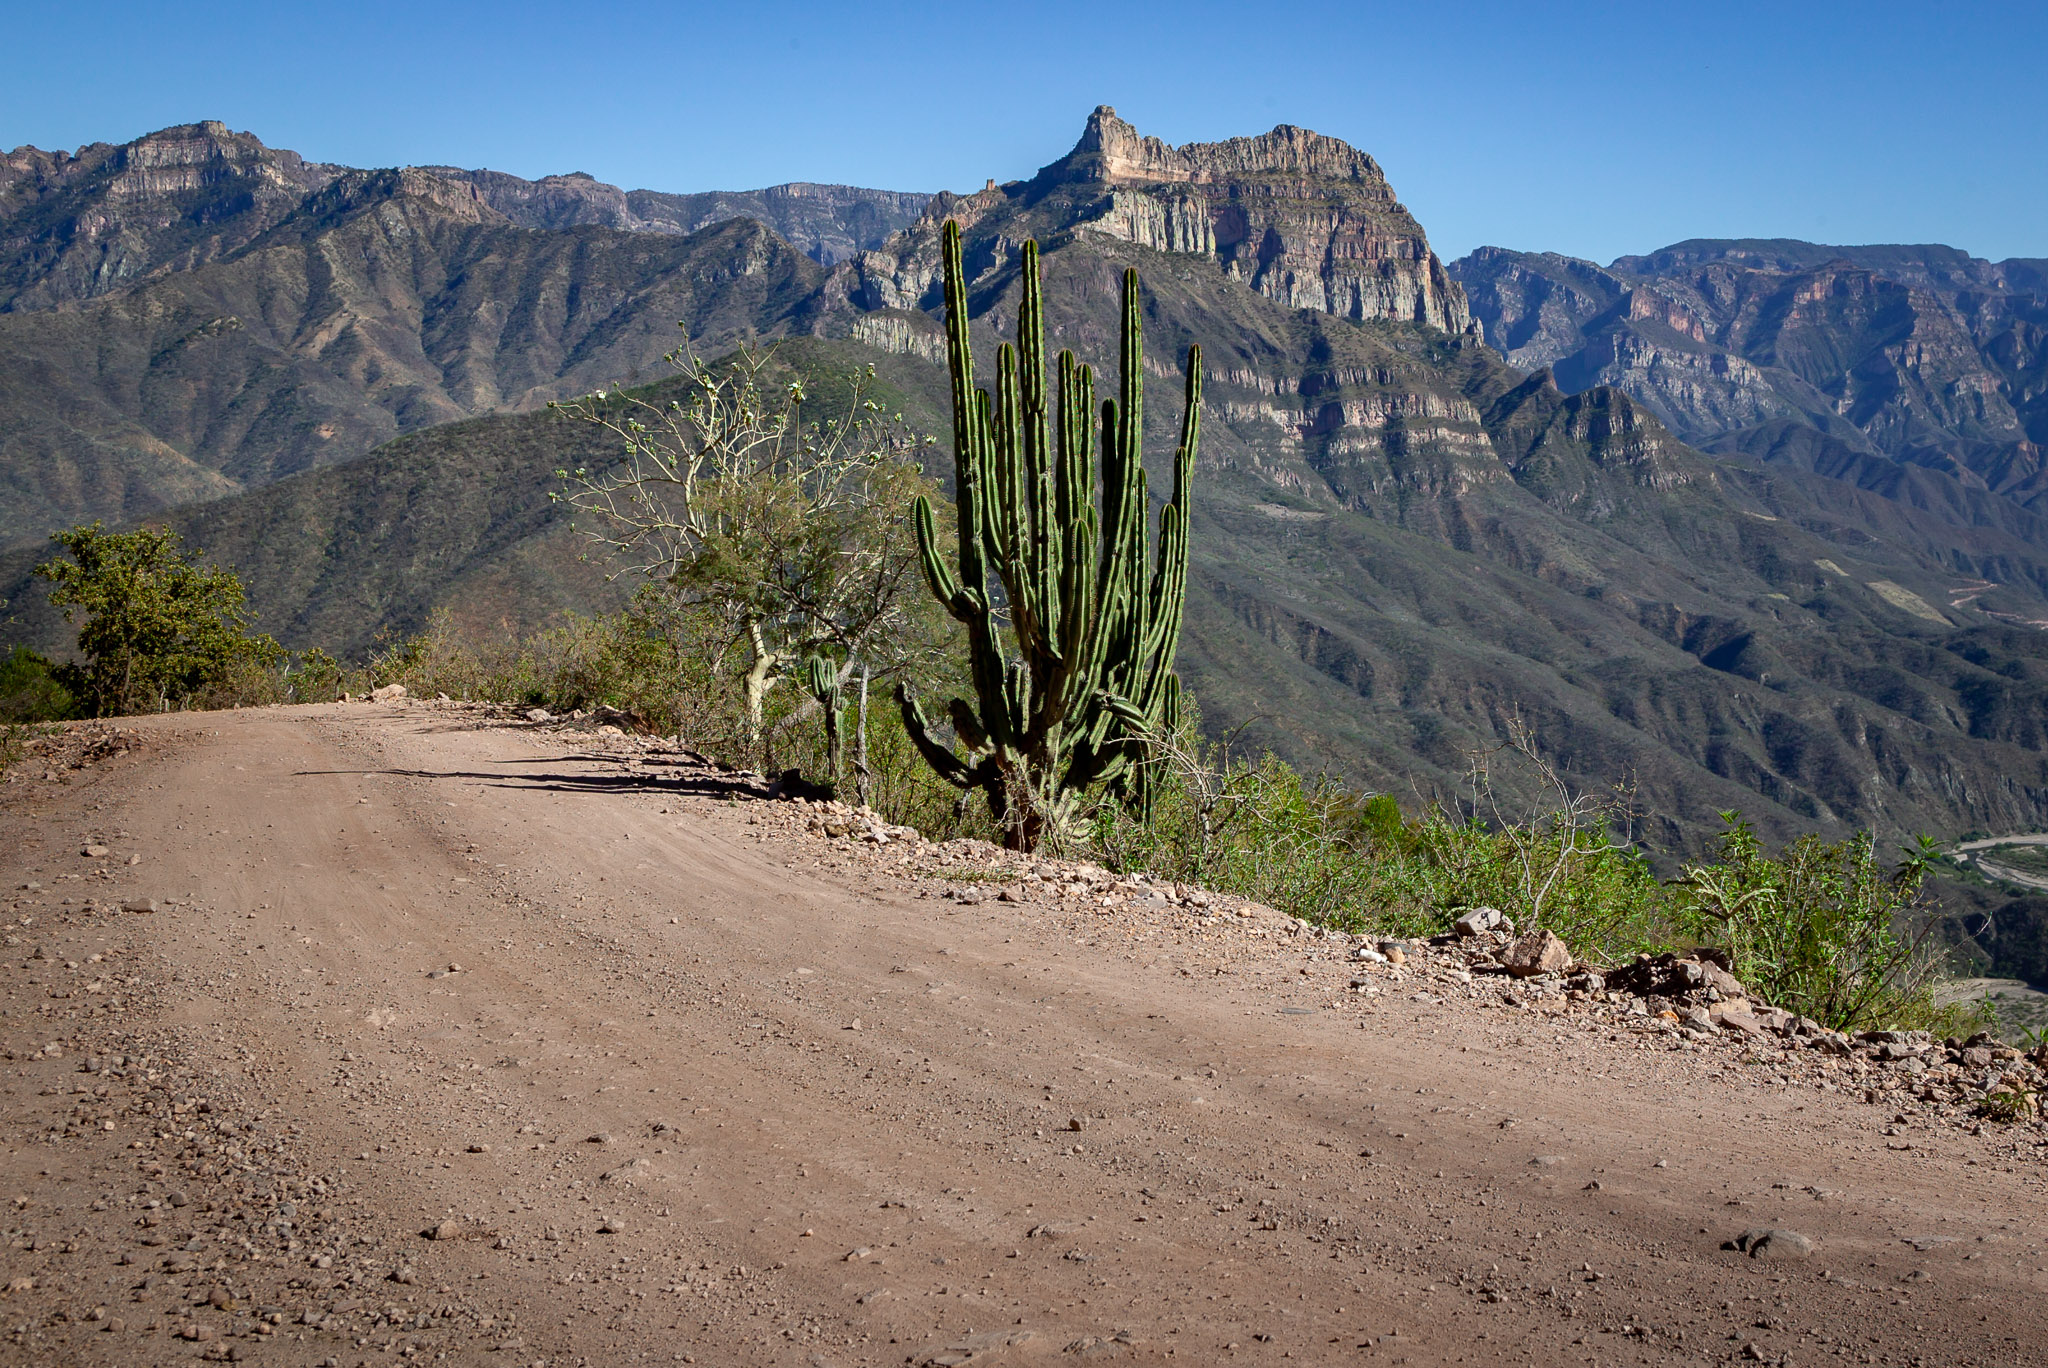 On 4WD road down into Copper Canyon